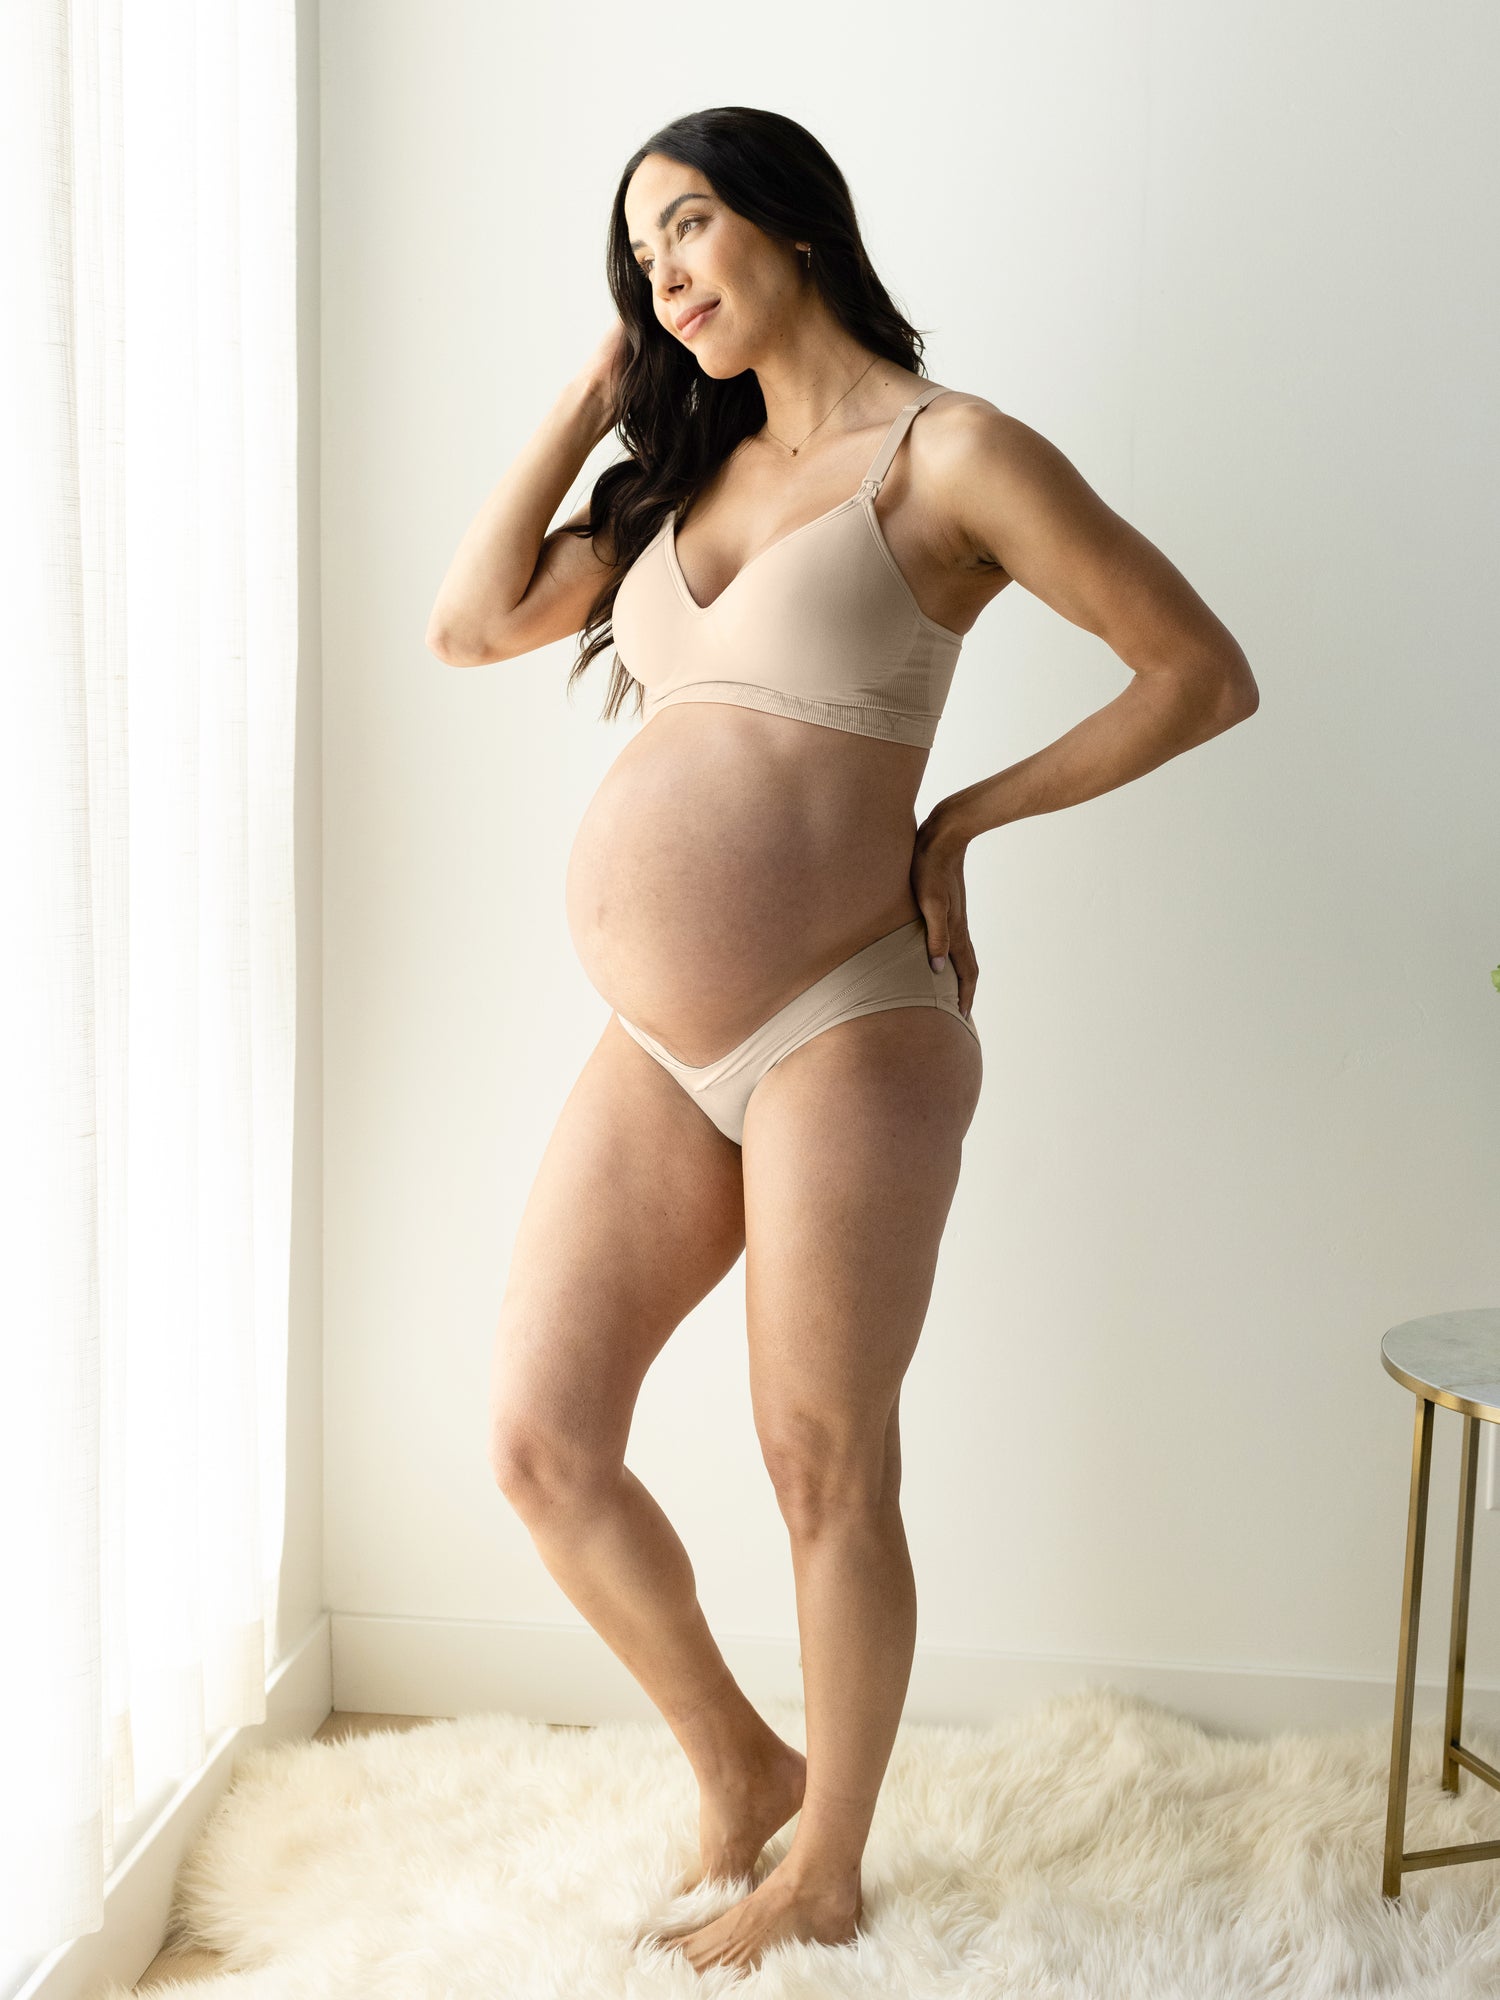 The best maternity underwear is on sale right now! @Kindred Bravely #k